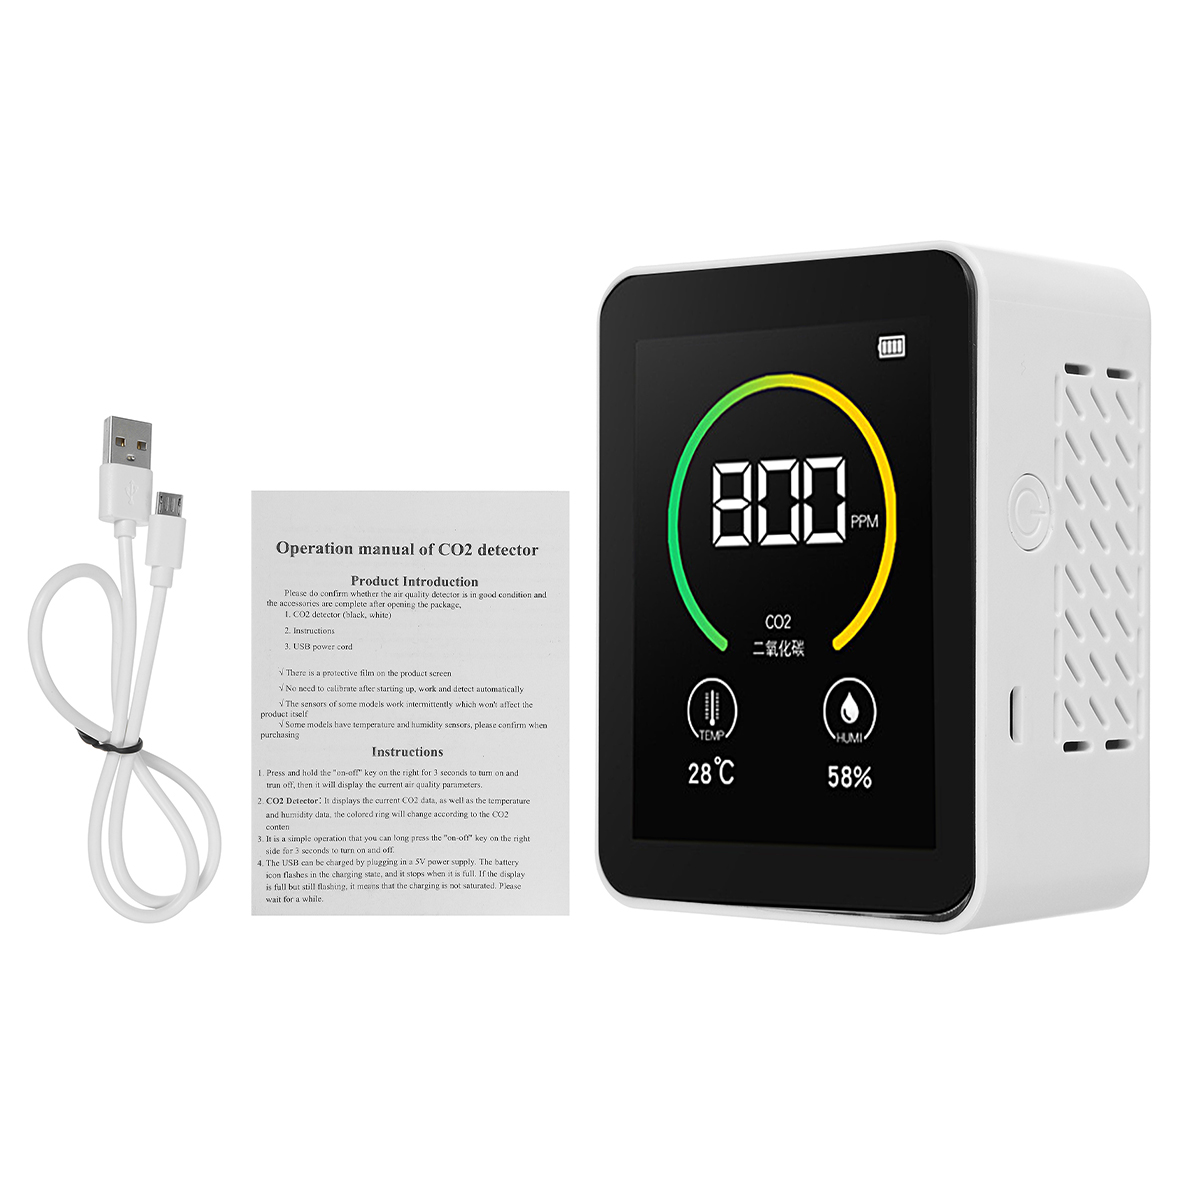 Find Gas Co2 Sensor Detector Air Quality Monitor Analyzer W/ Temperature Humidity Display for Sale on Gipsybee.com with cryptocurrencies